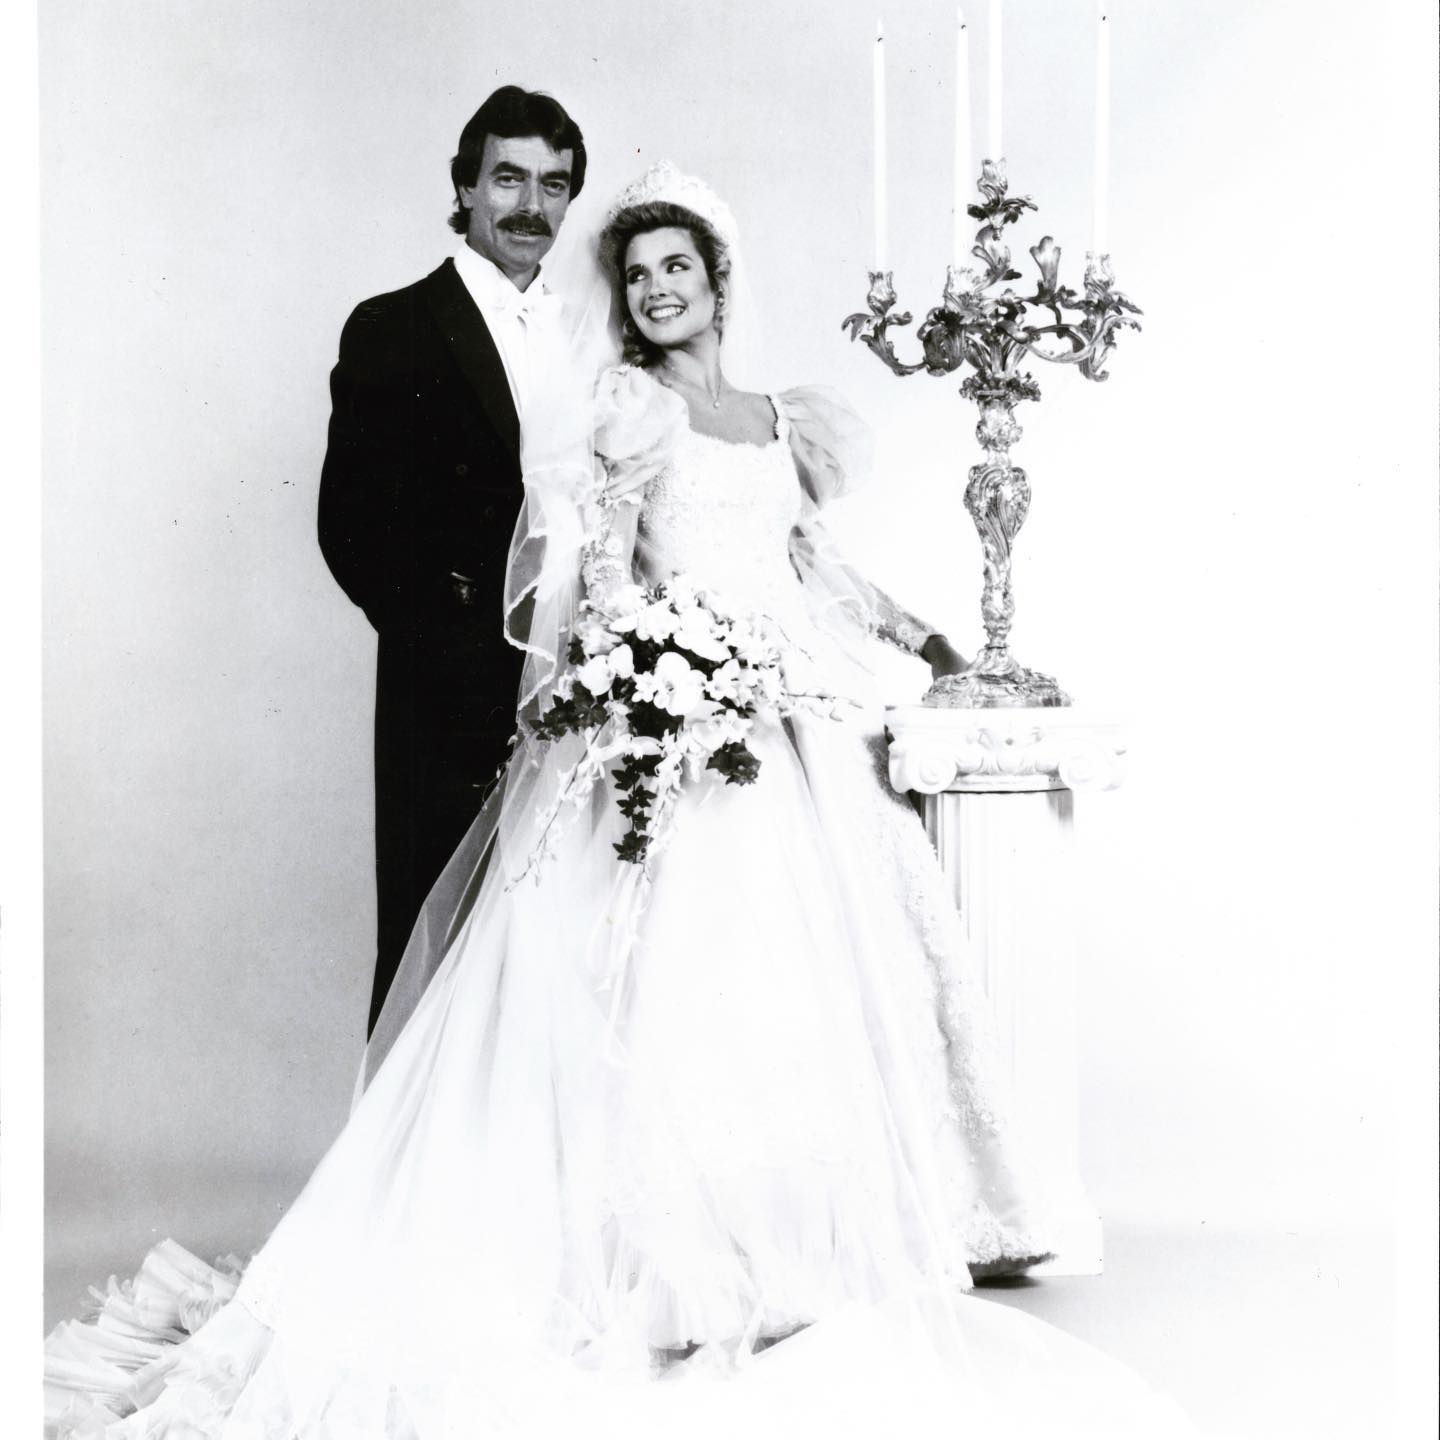 Black and white image of Melody Thomas Scott with Eric Braeden in wedding dress.